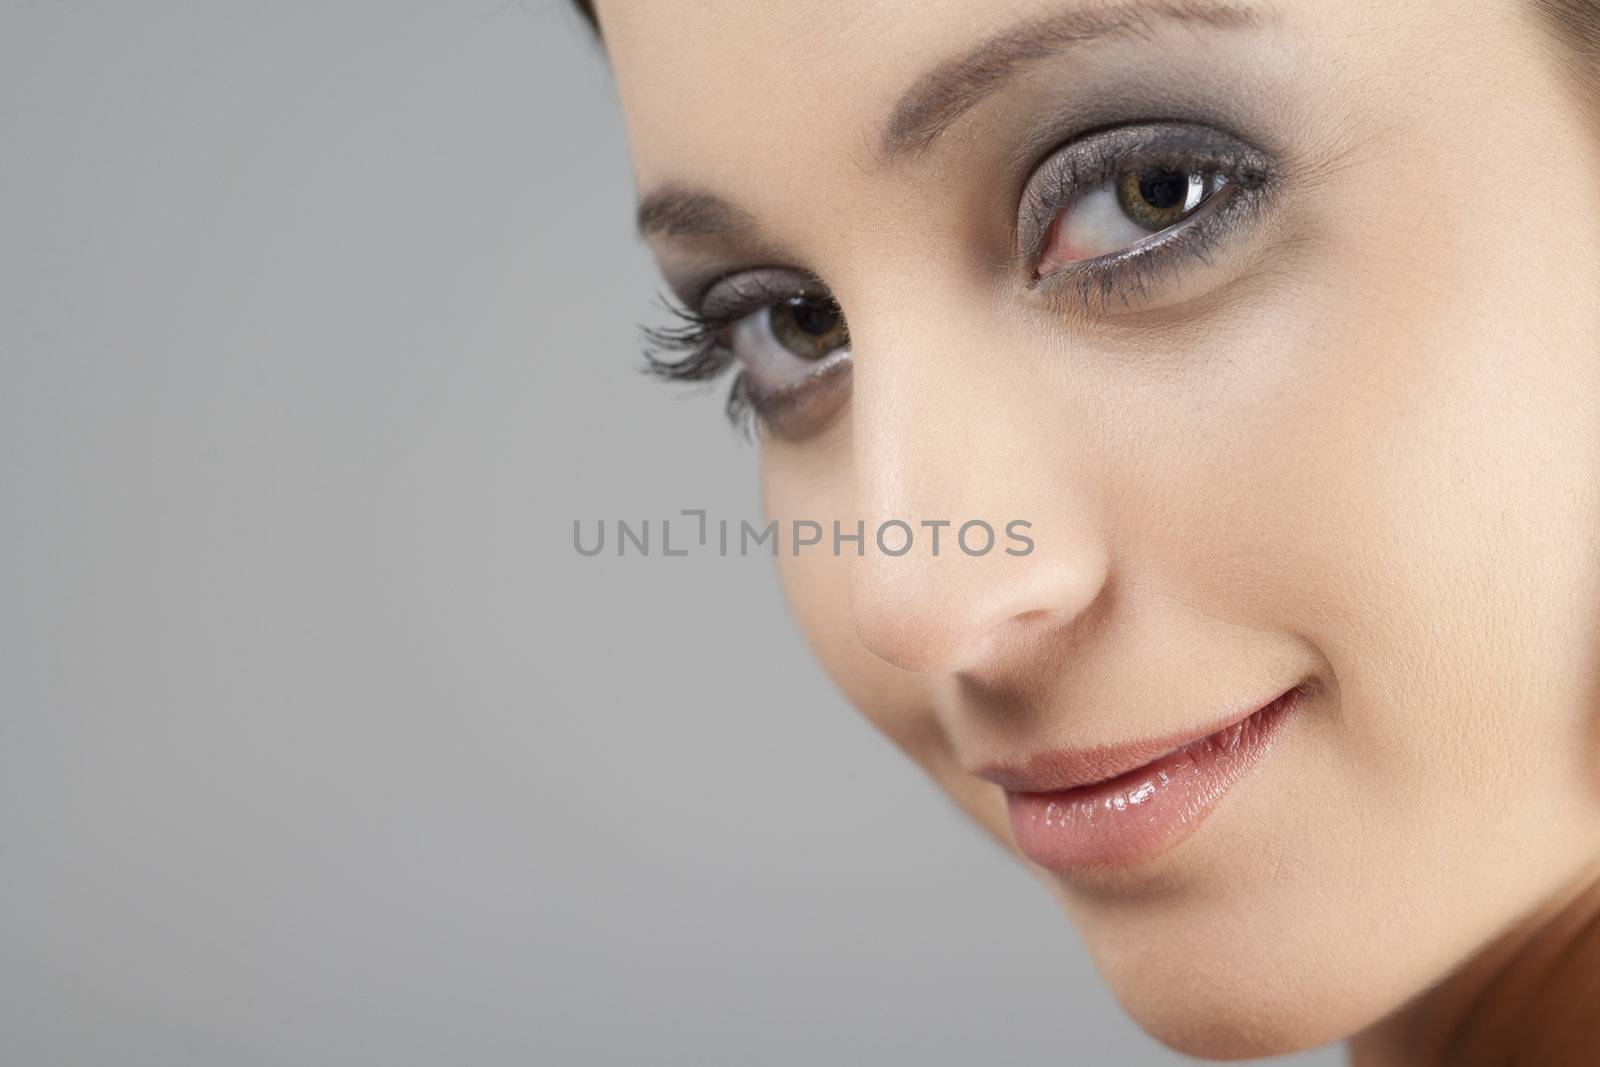 Young woman in beauty style pose